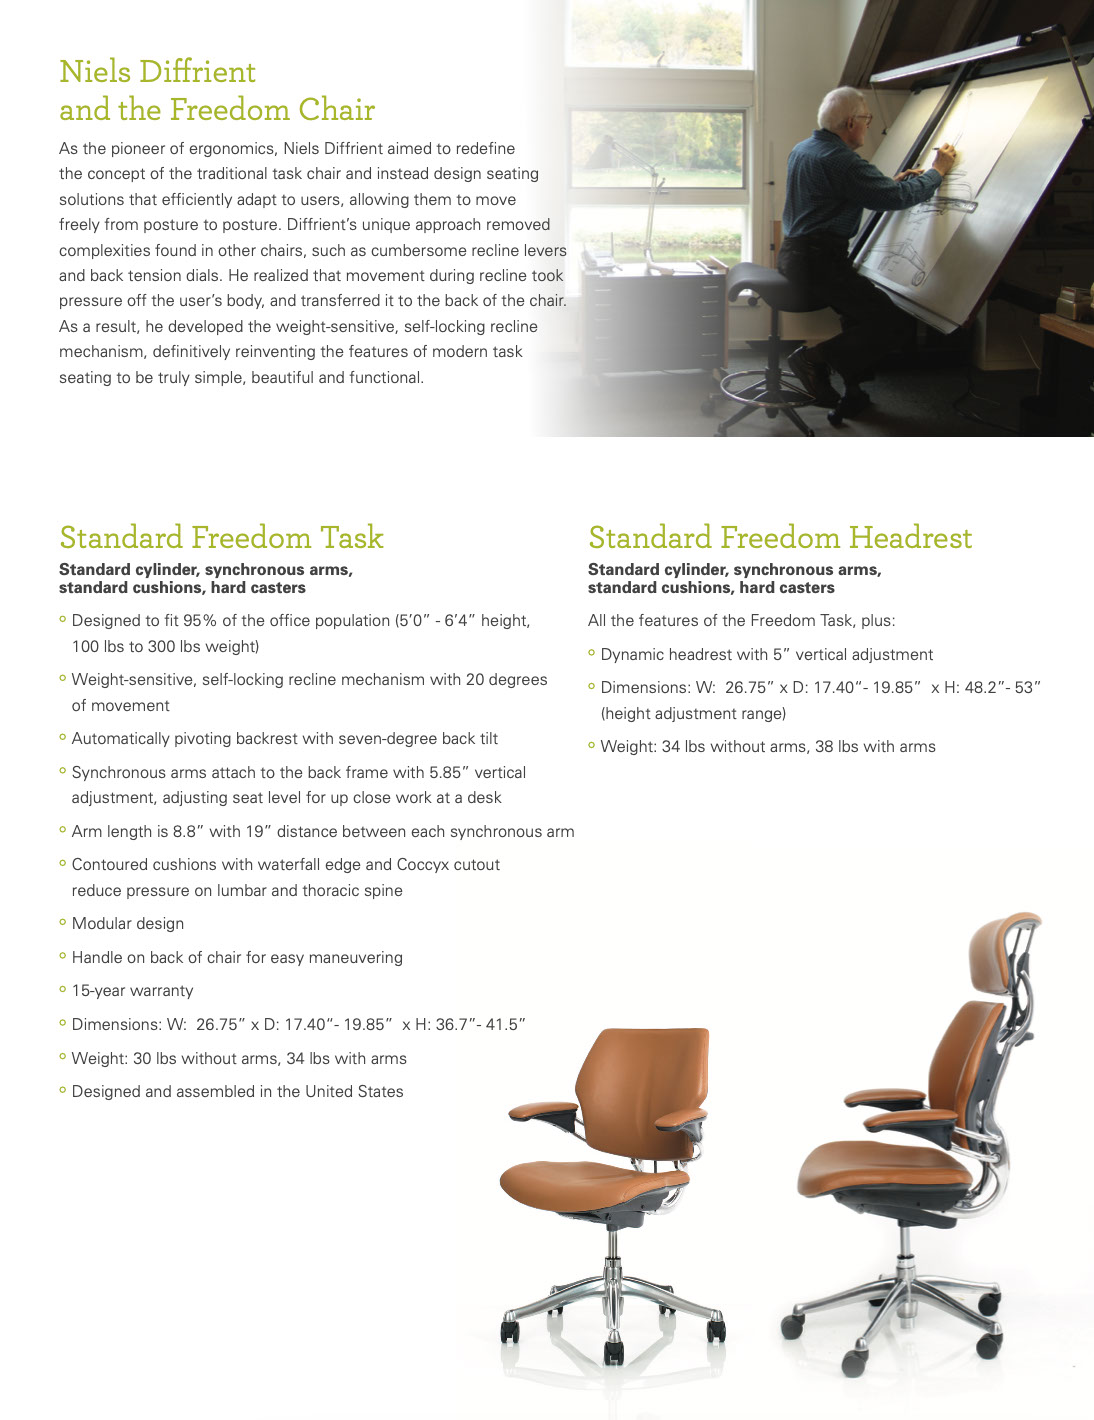 Humanscale Freedom chair rendition image